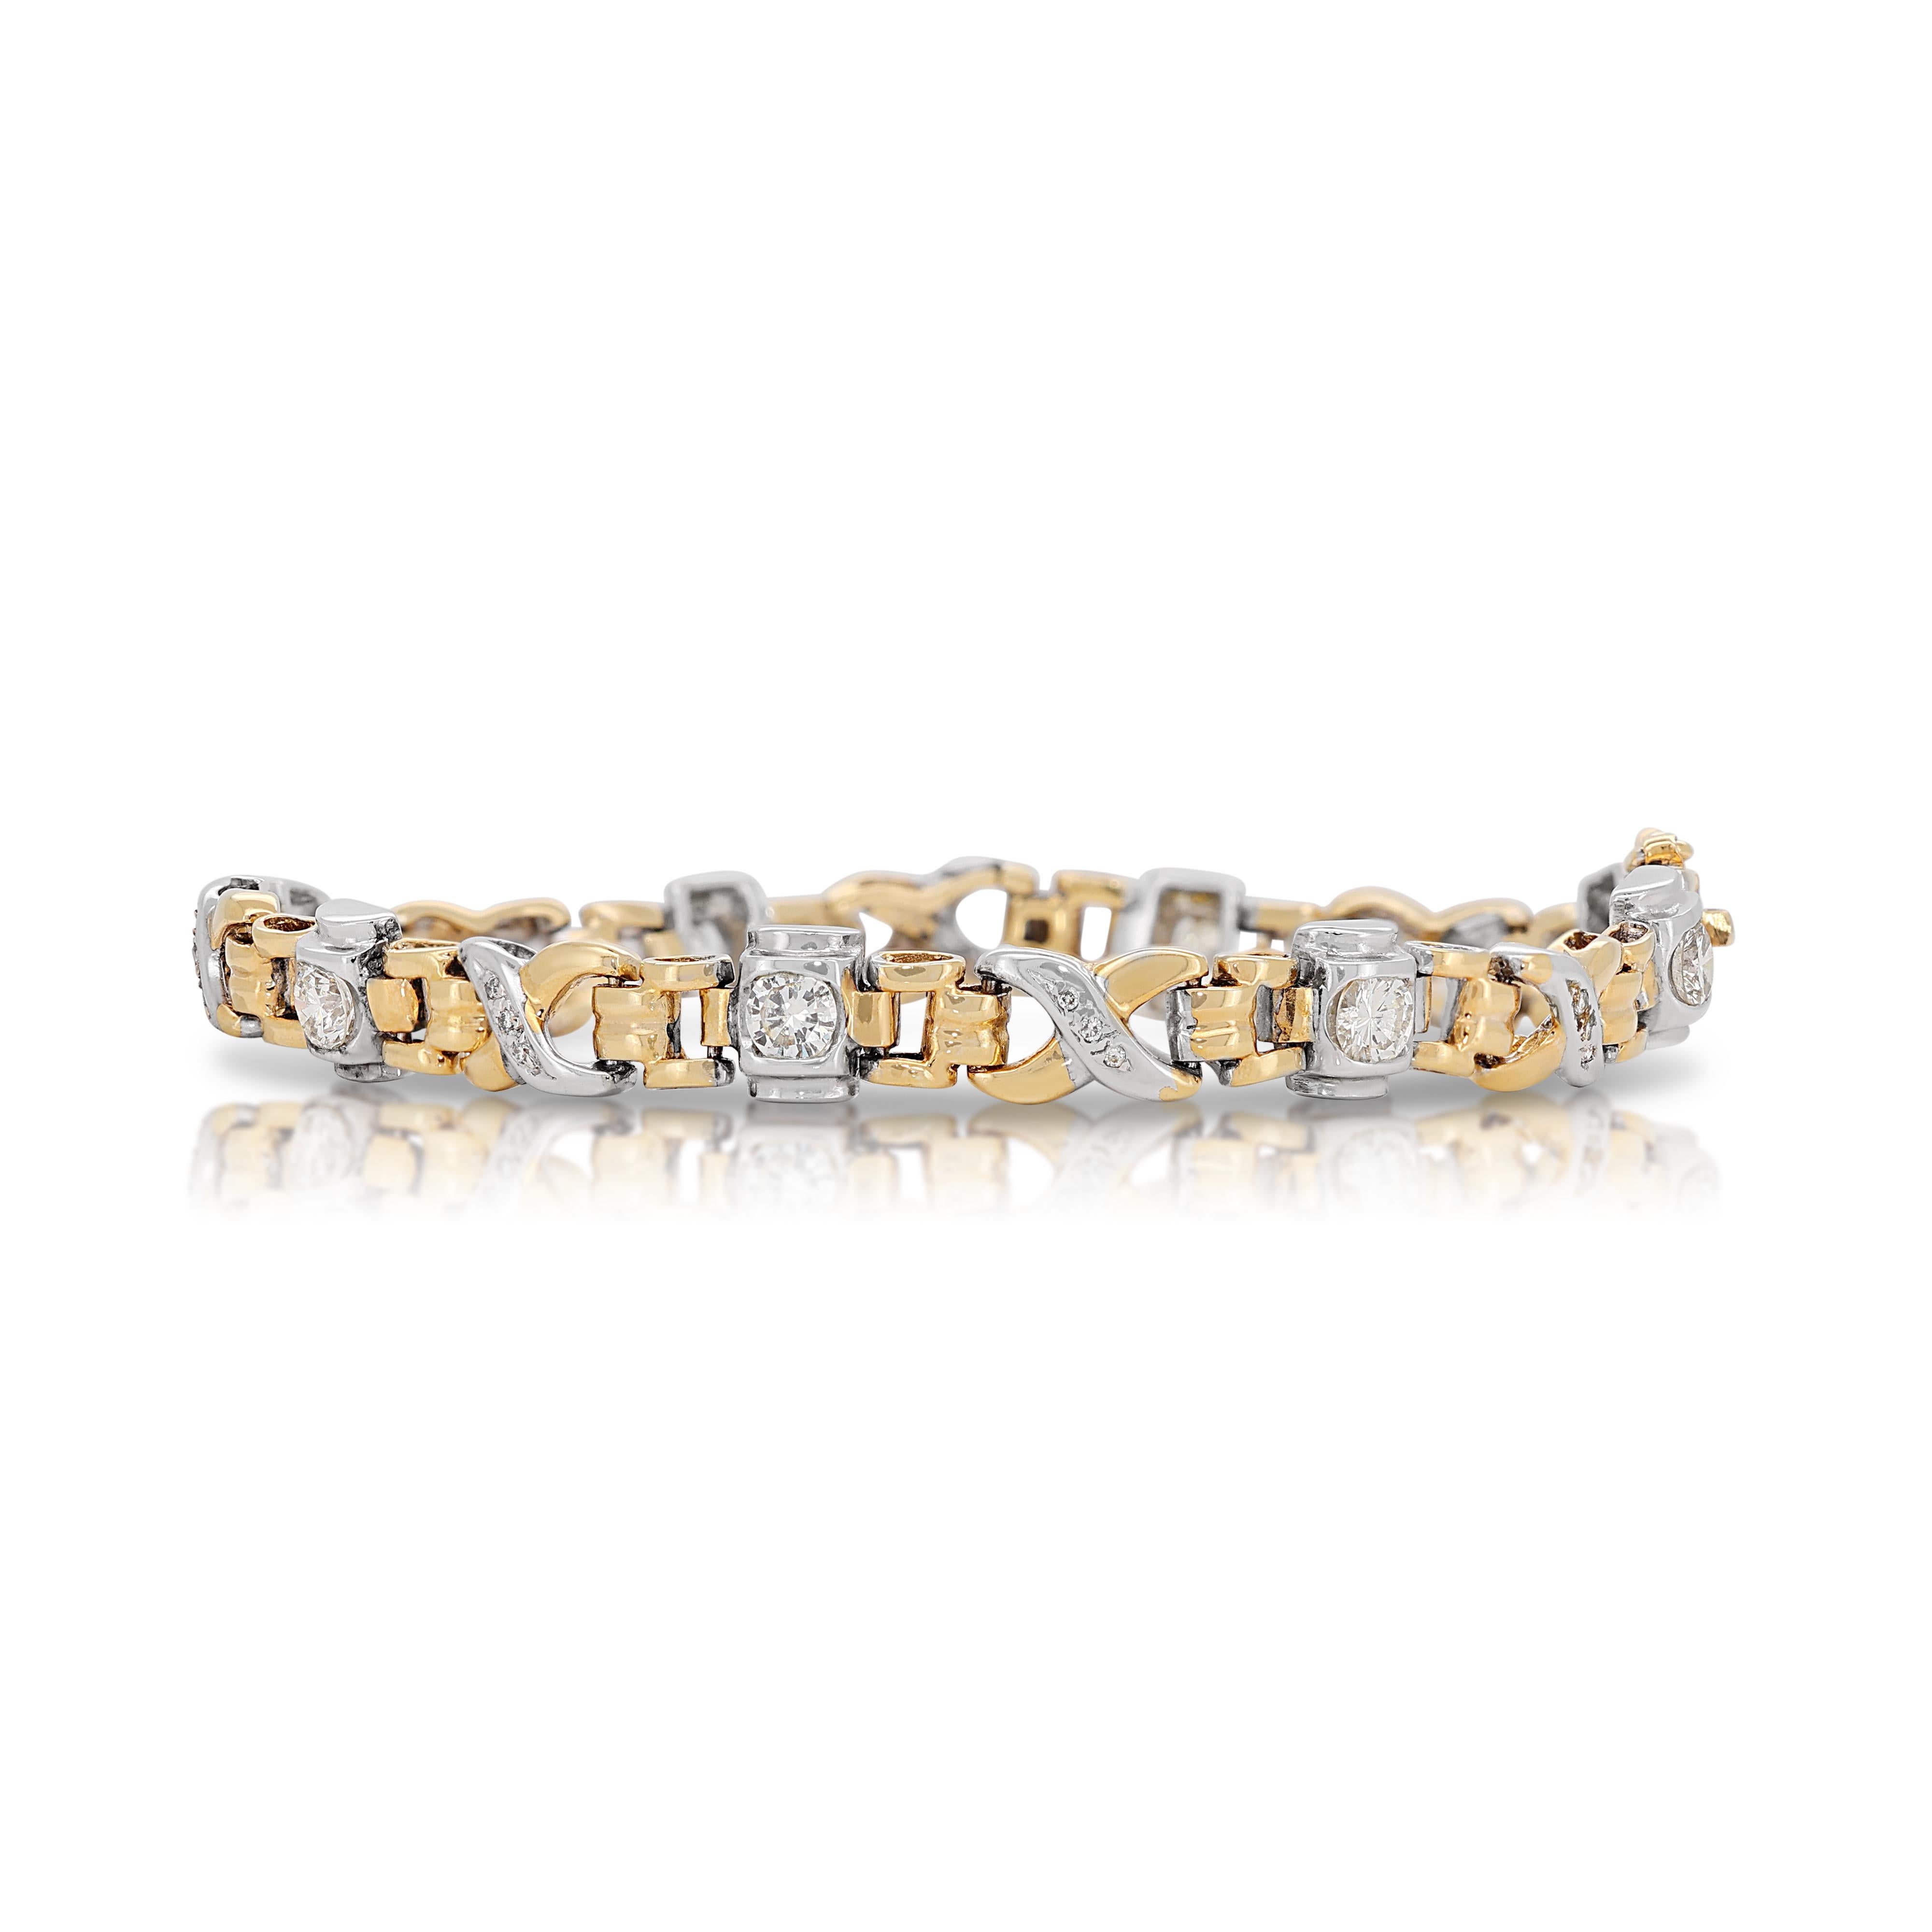 Exquisite 1.44ct Diamonds Bracelet in 18K White and Yellow Gold For Sale 1